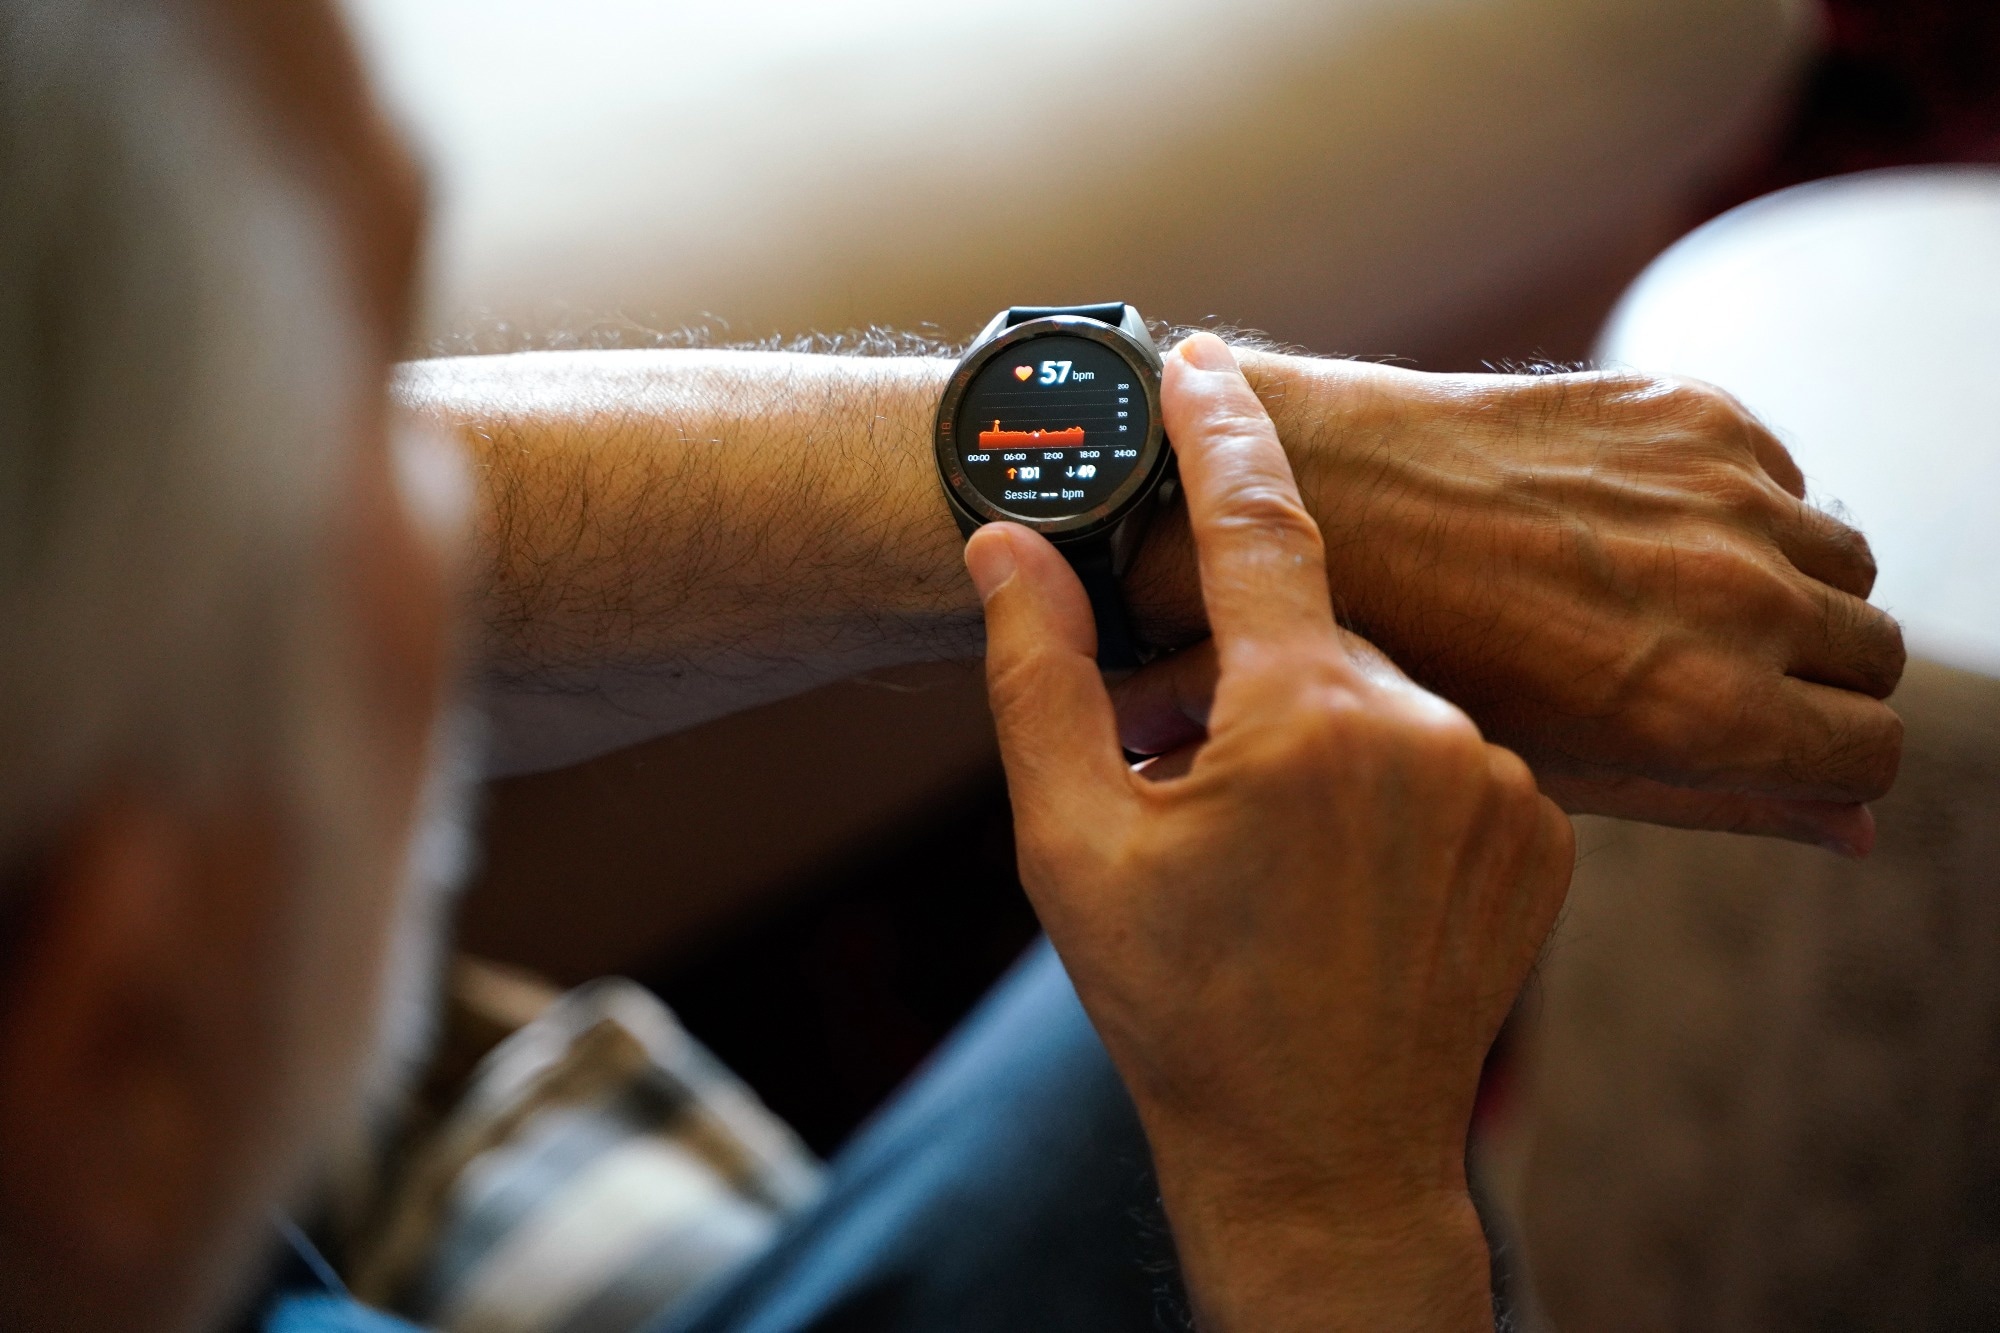 Study: Use of Wearable Devices in Individuals With or at Risk for Cardiovascular Disease in the US, 2019 to 2020. Image Credit: LordBeard/Shutterstock.com